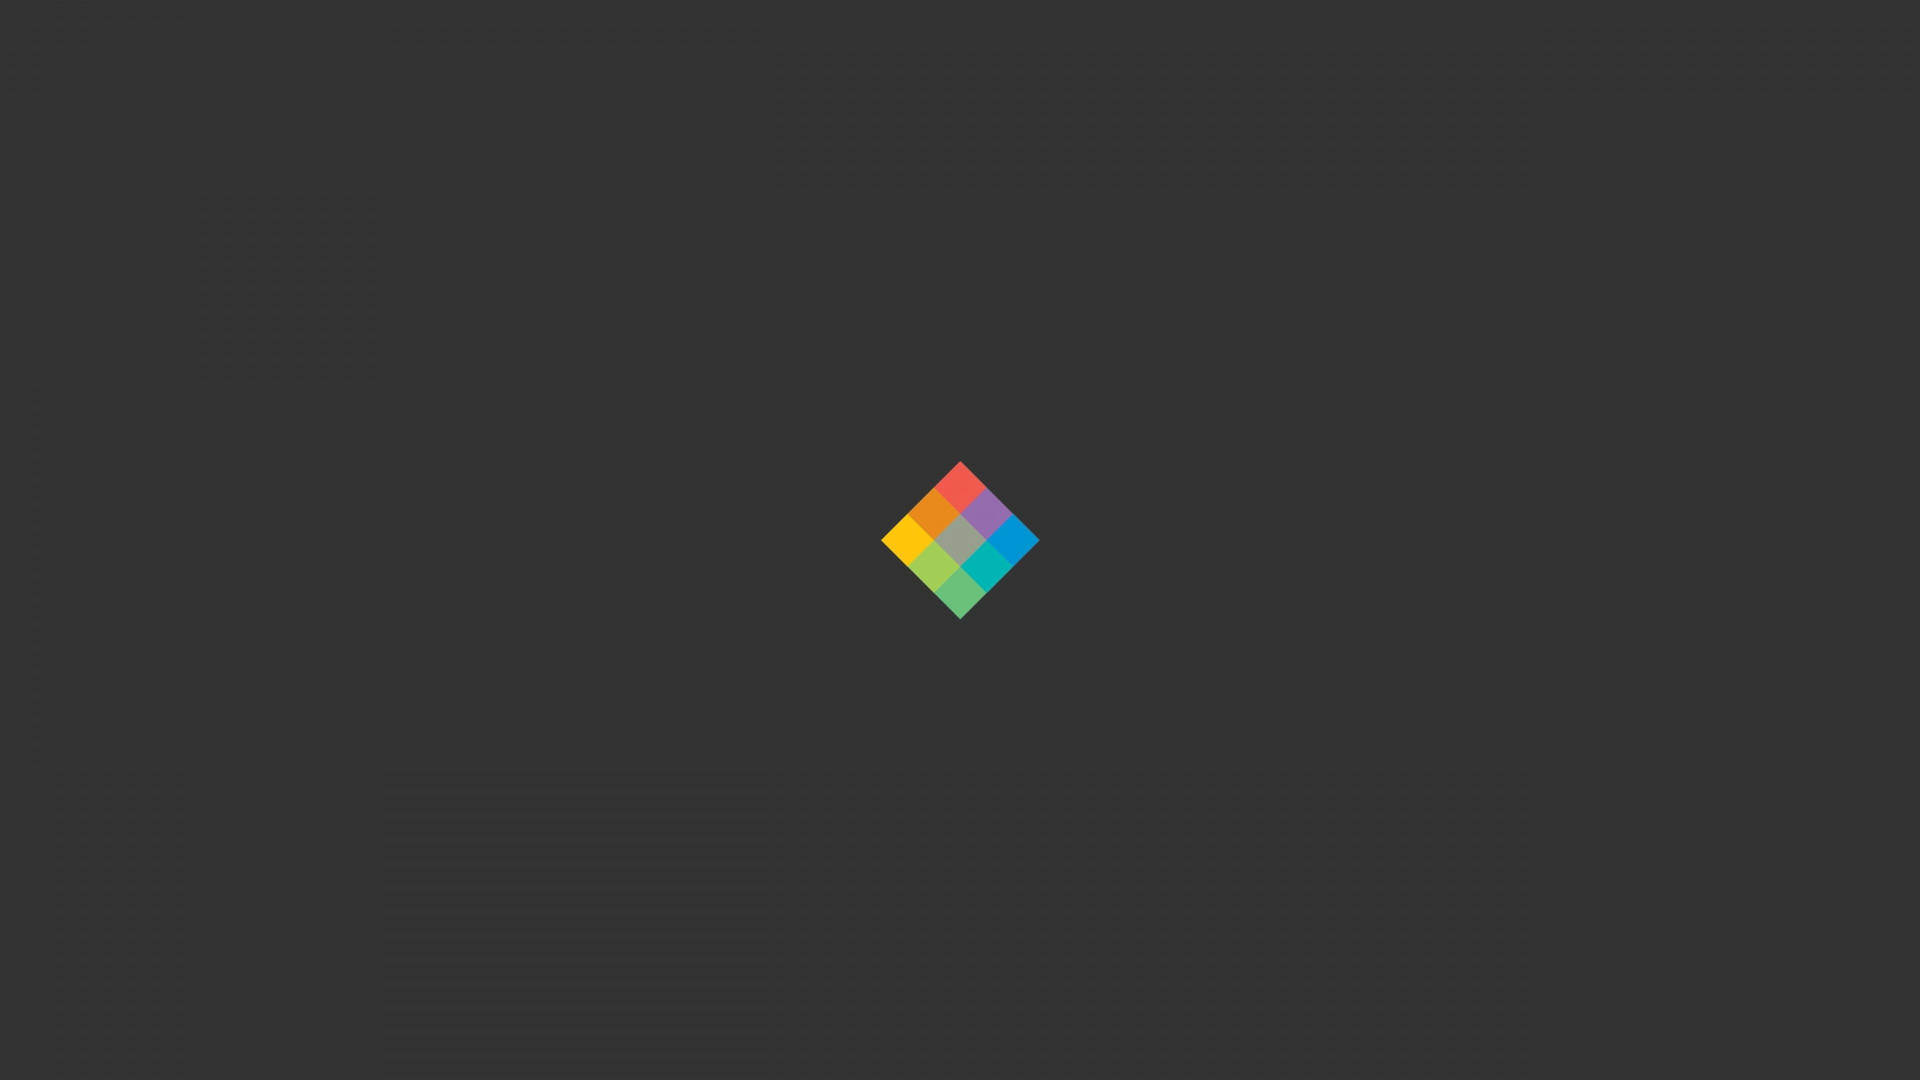 Minimalist Tablet Colorful Cube Wallpaper